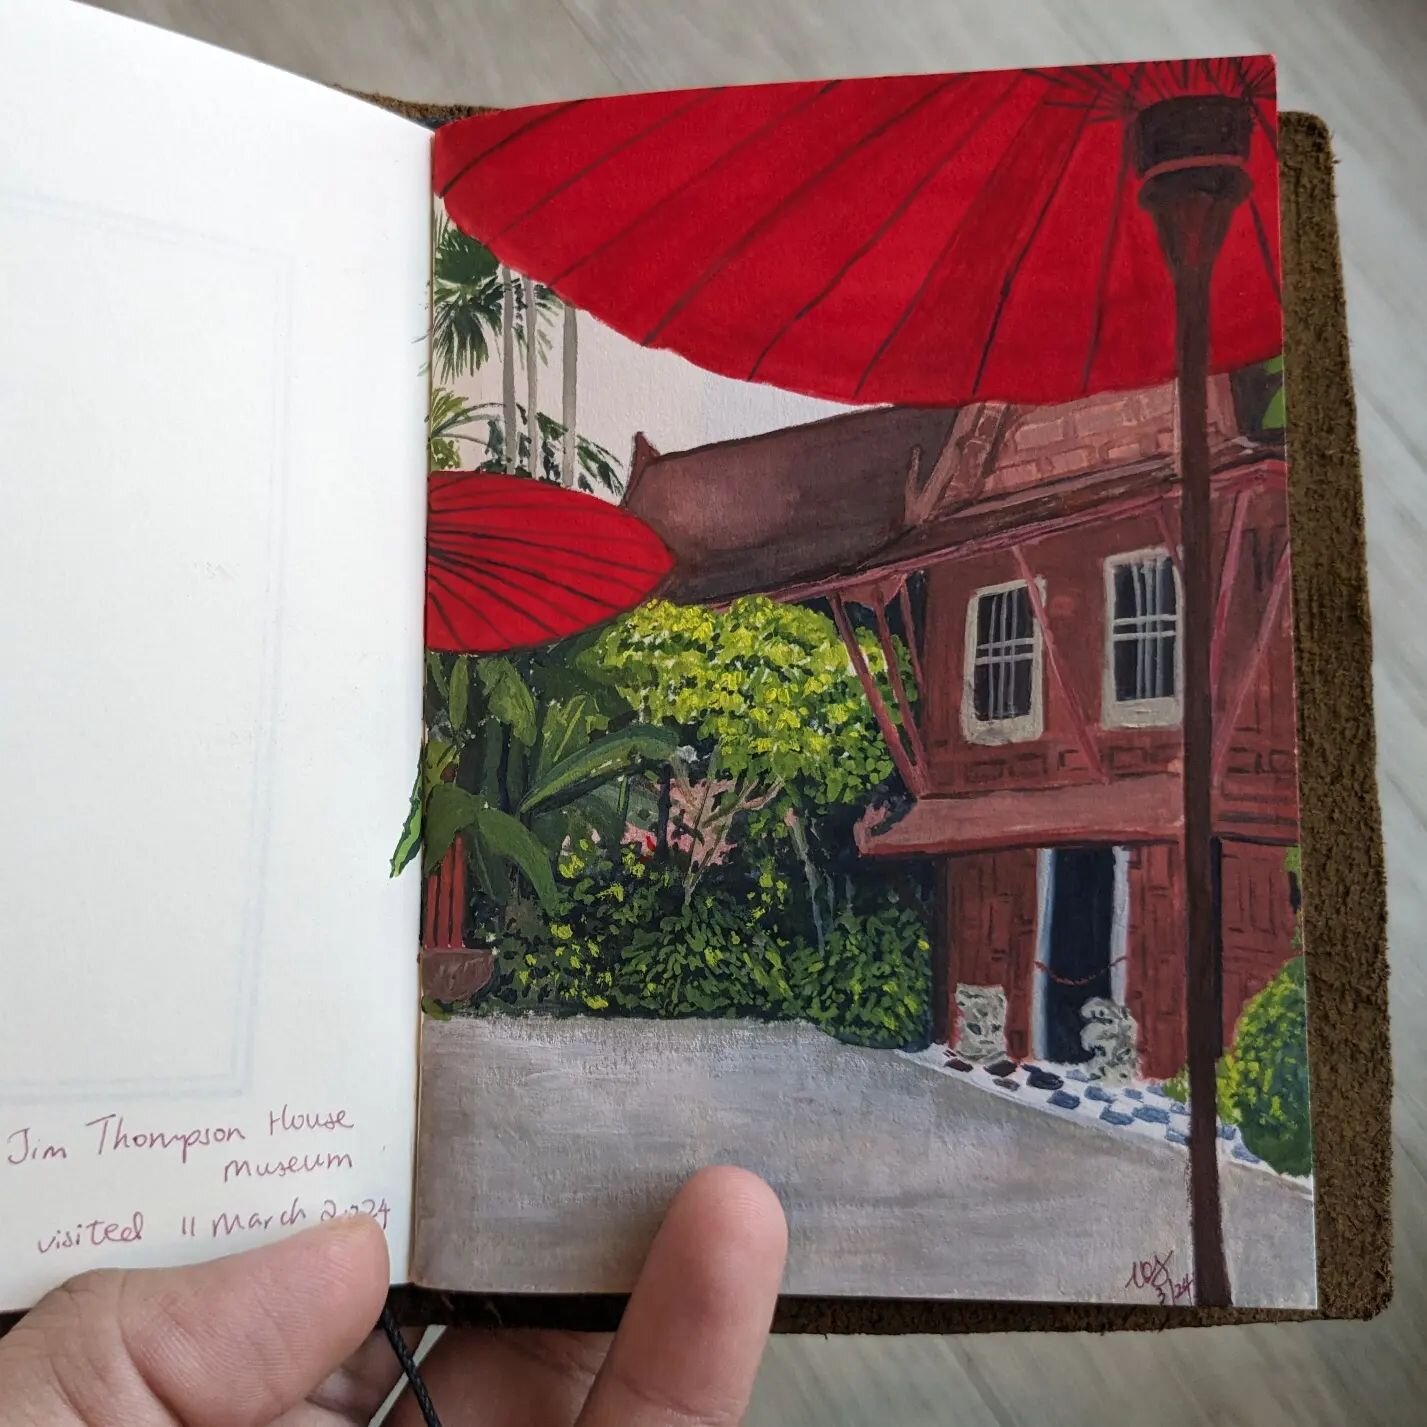 Jim Thompson House Museum. Absolutely loved the lovely grounds of this museum and spent a few hours doing a quick sketch there (not this piece). It's a beautiful and absolutely delightful spot especially if you're into traditional hand-made crafts, b